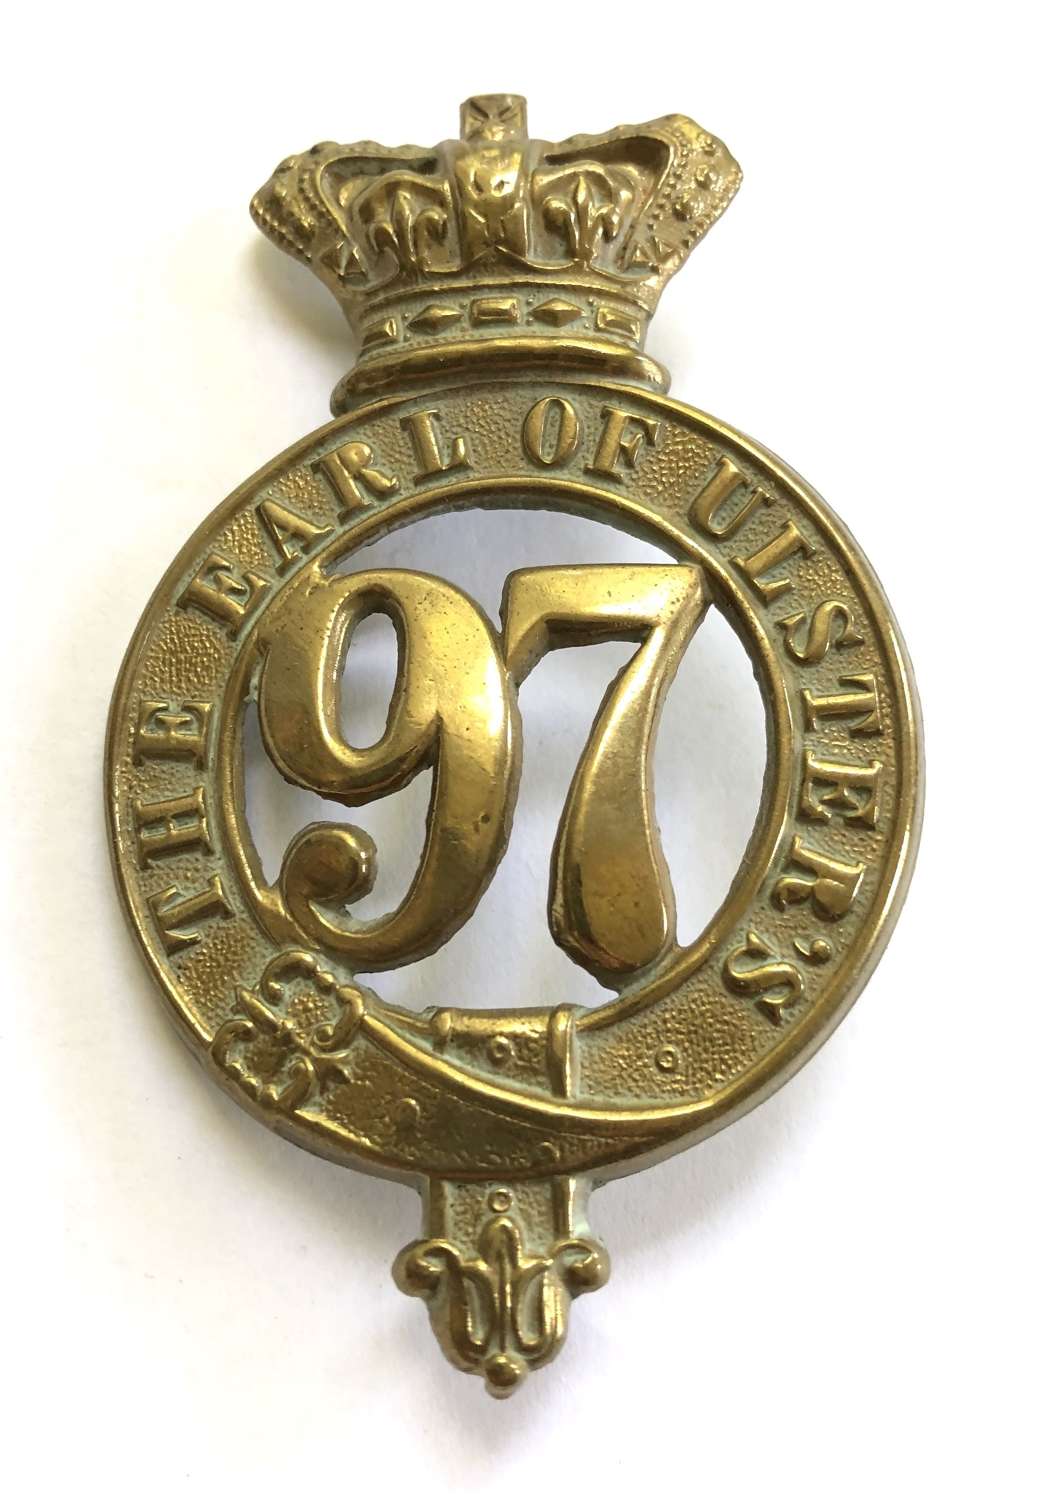 97th (Earl of Ulster’s) Regiment, Victorian OR’s glengarry badge